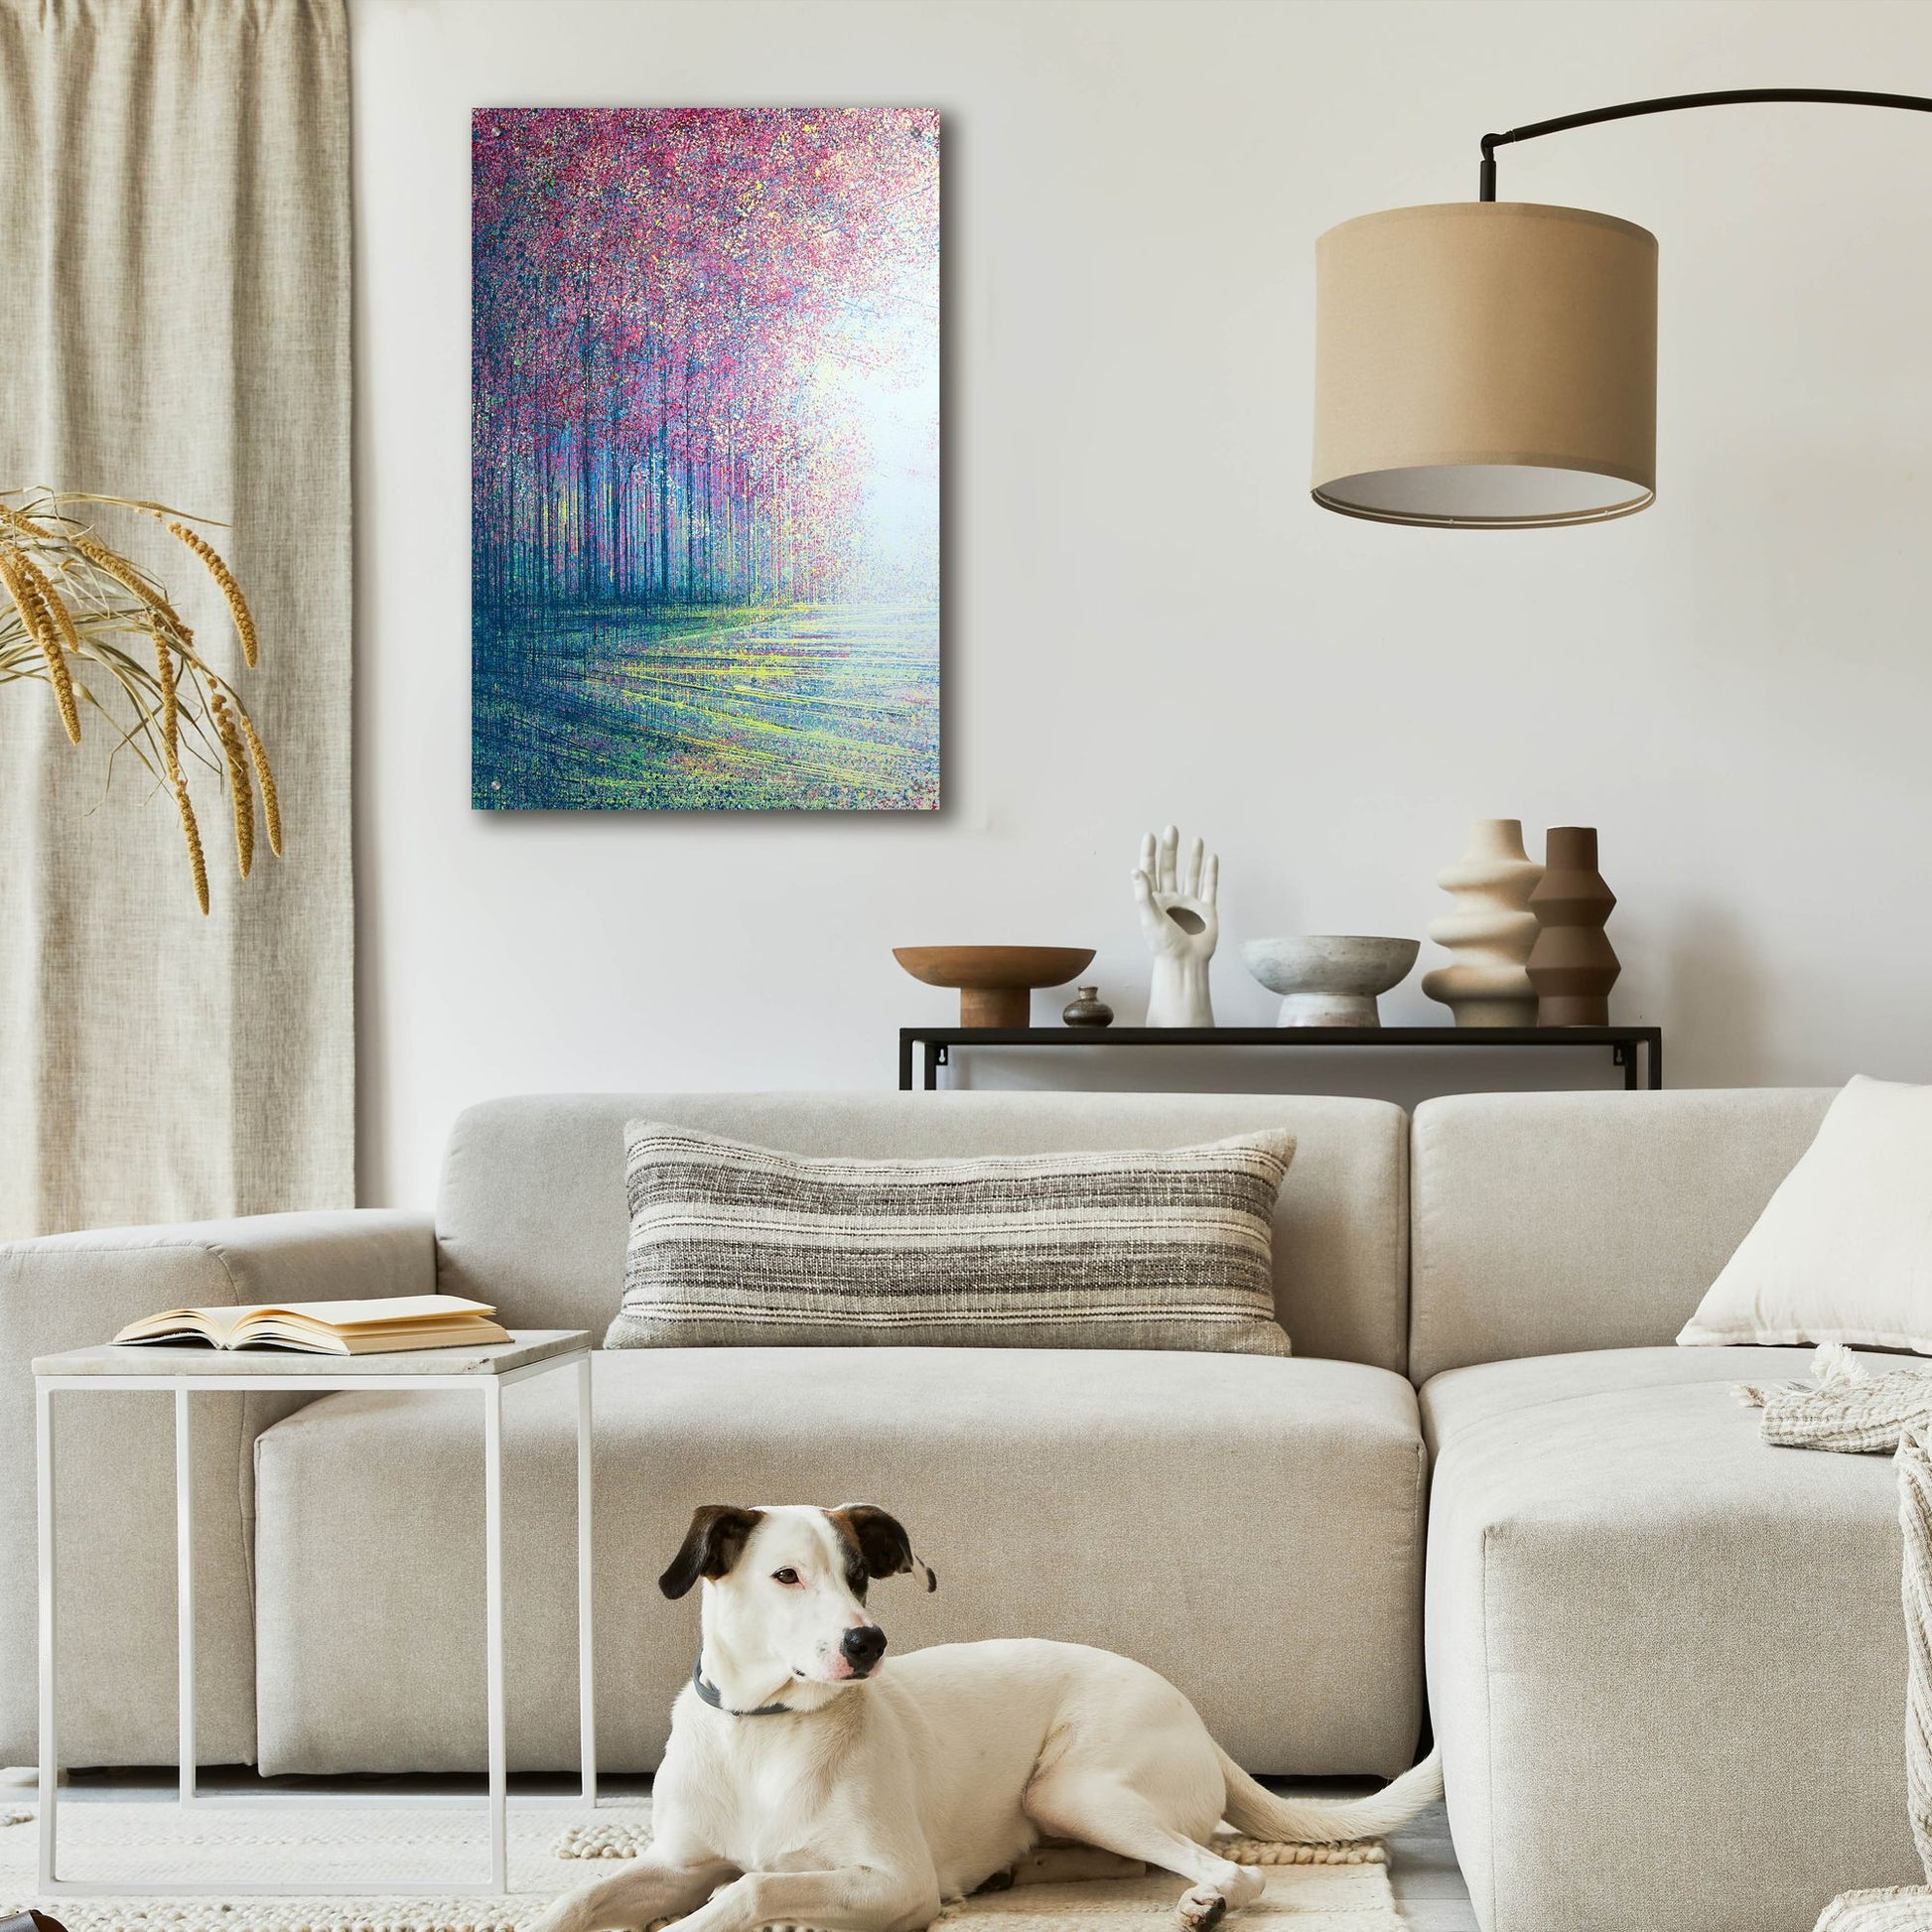 Epic Art 'Tree Blossom in Bright Light' by Marc Todd, Acrylic Glass Wall Art,24x36